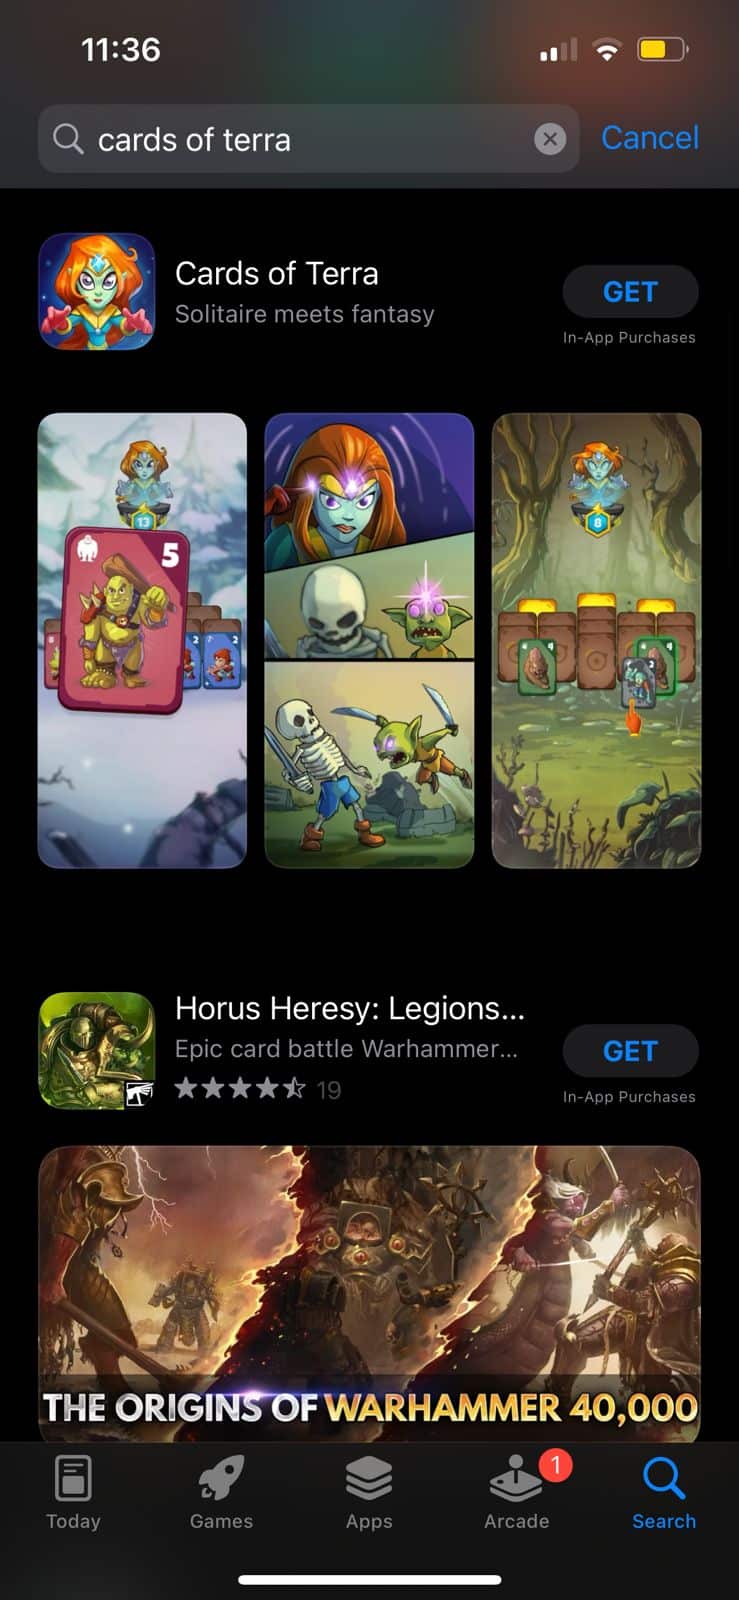 Cards of Terra on app store